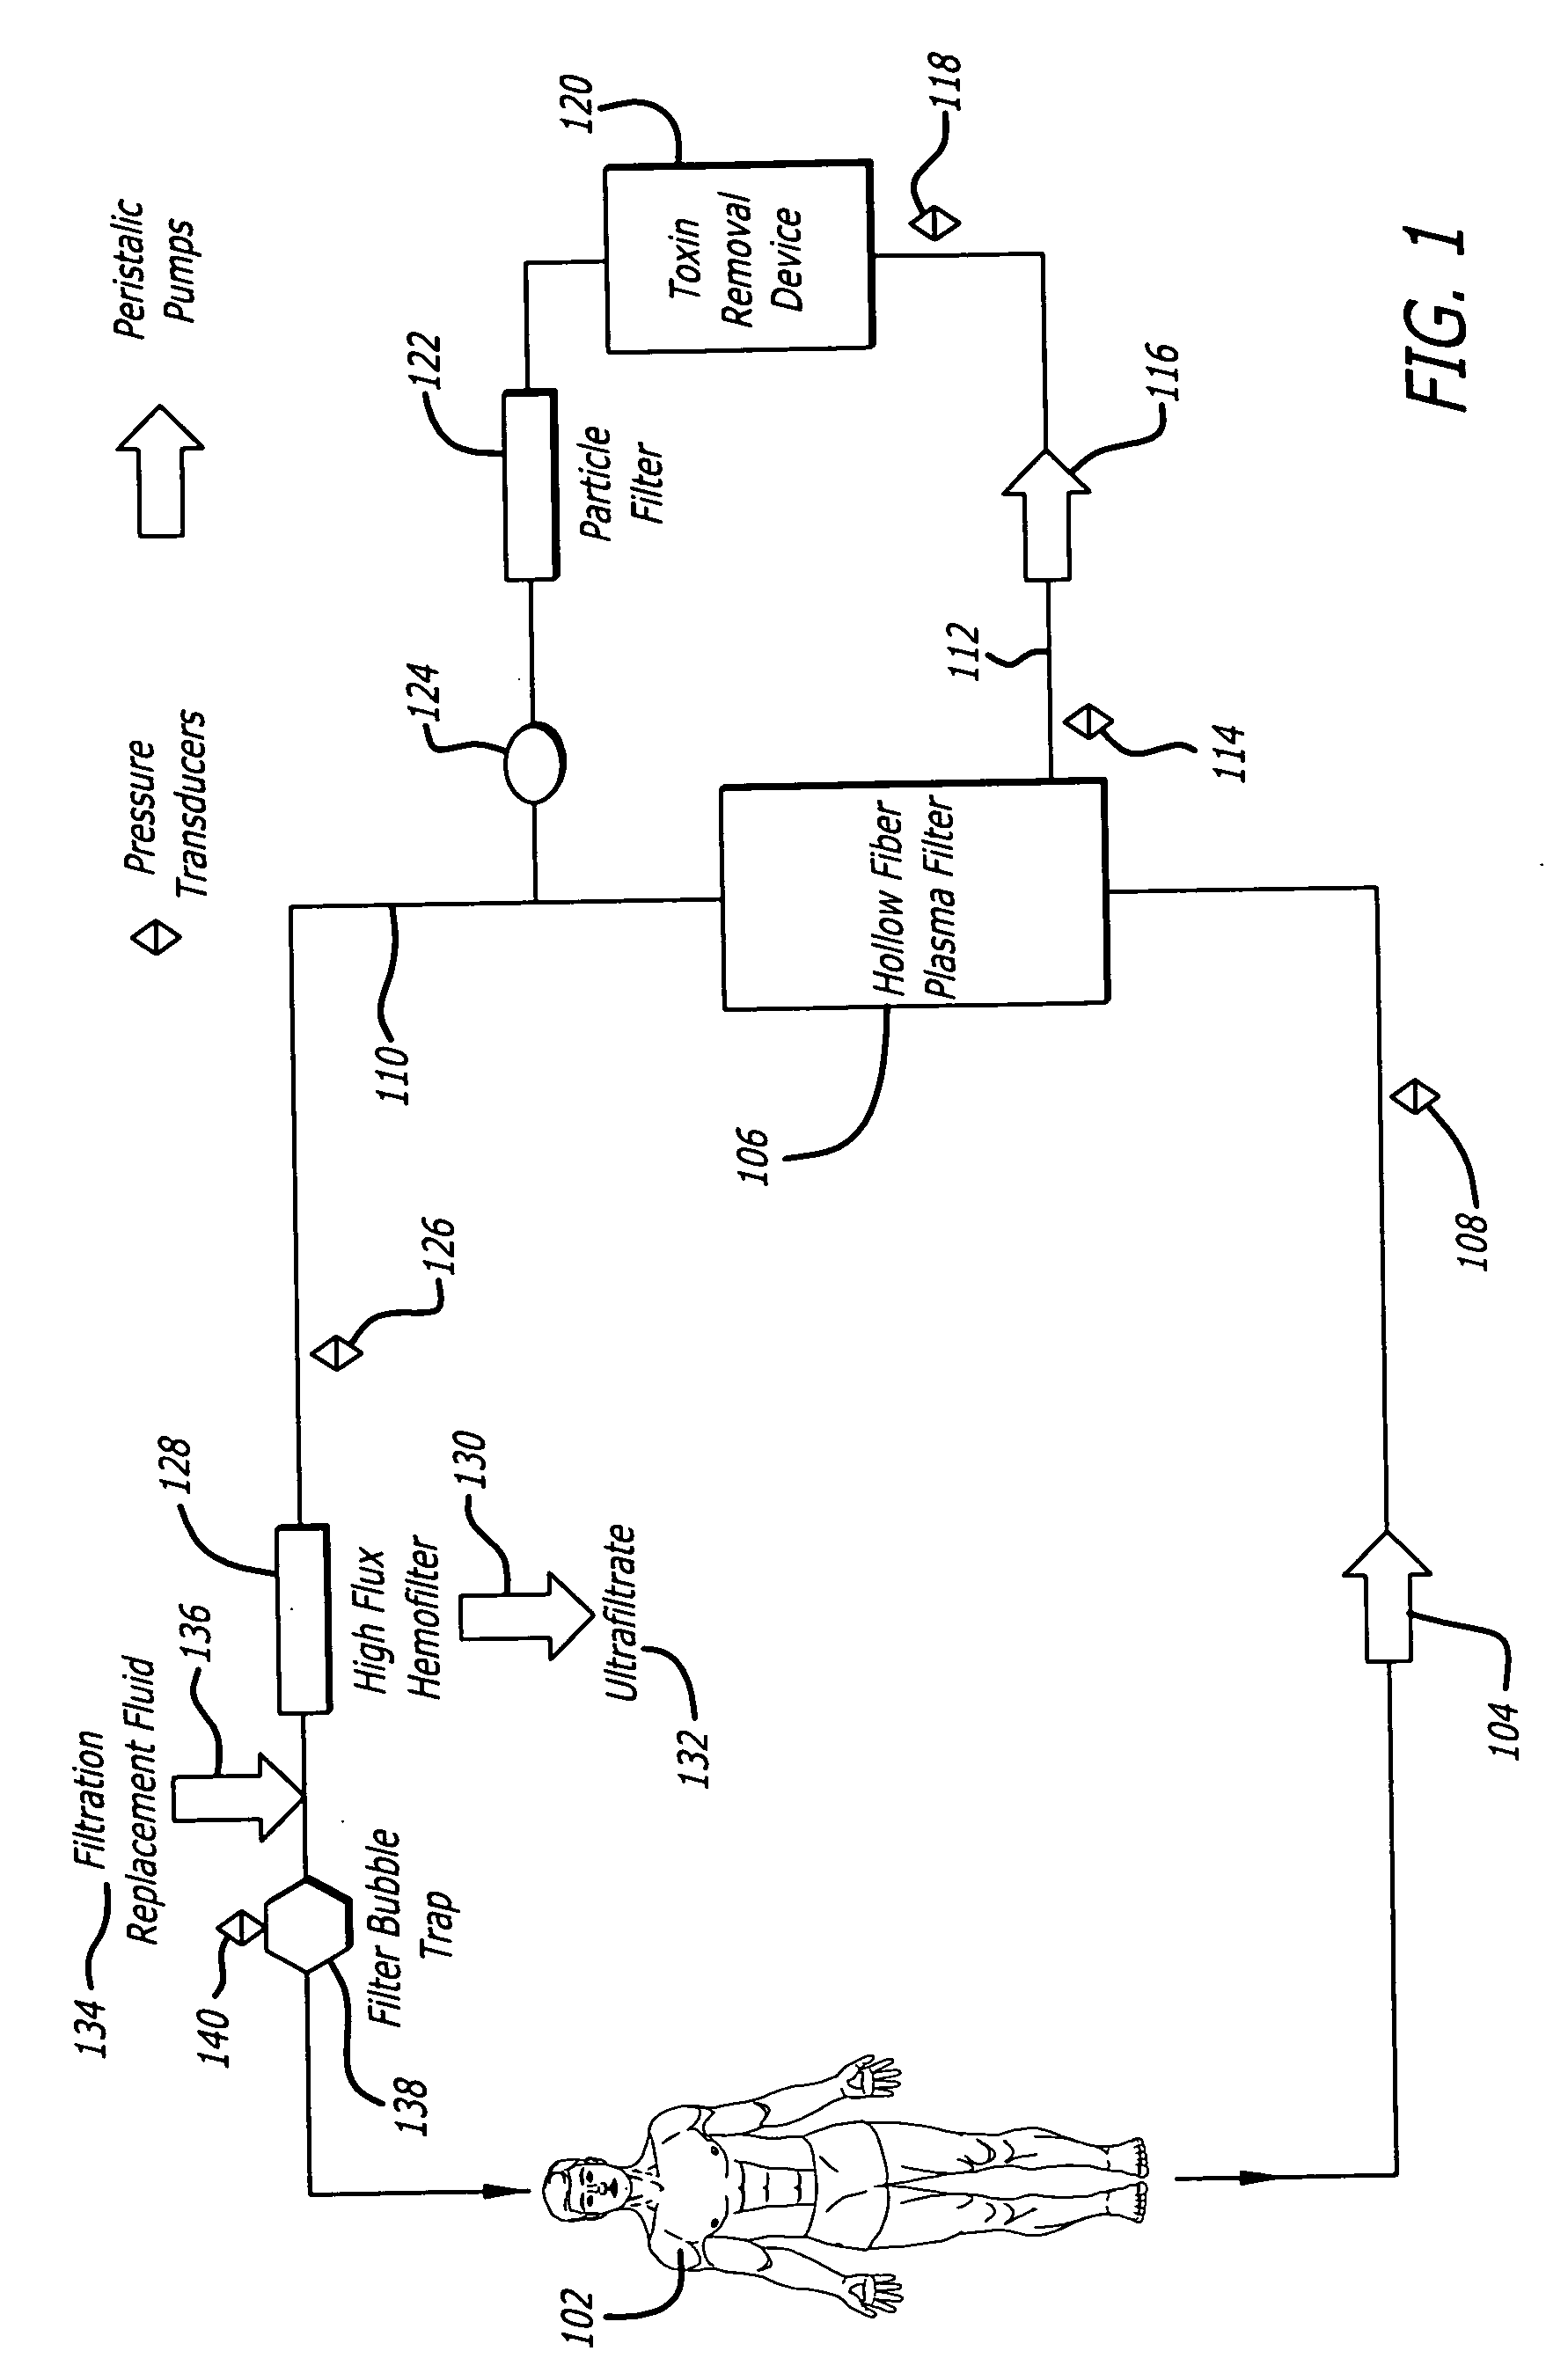 Plasma detoxification and volume control system and methods of use